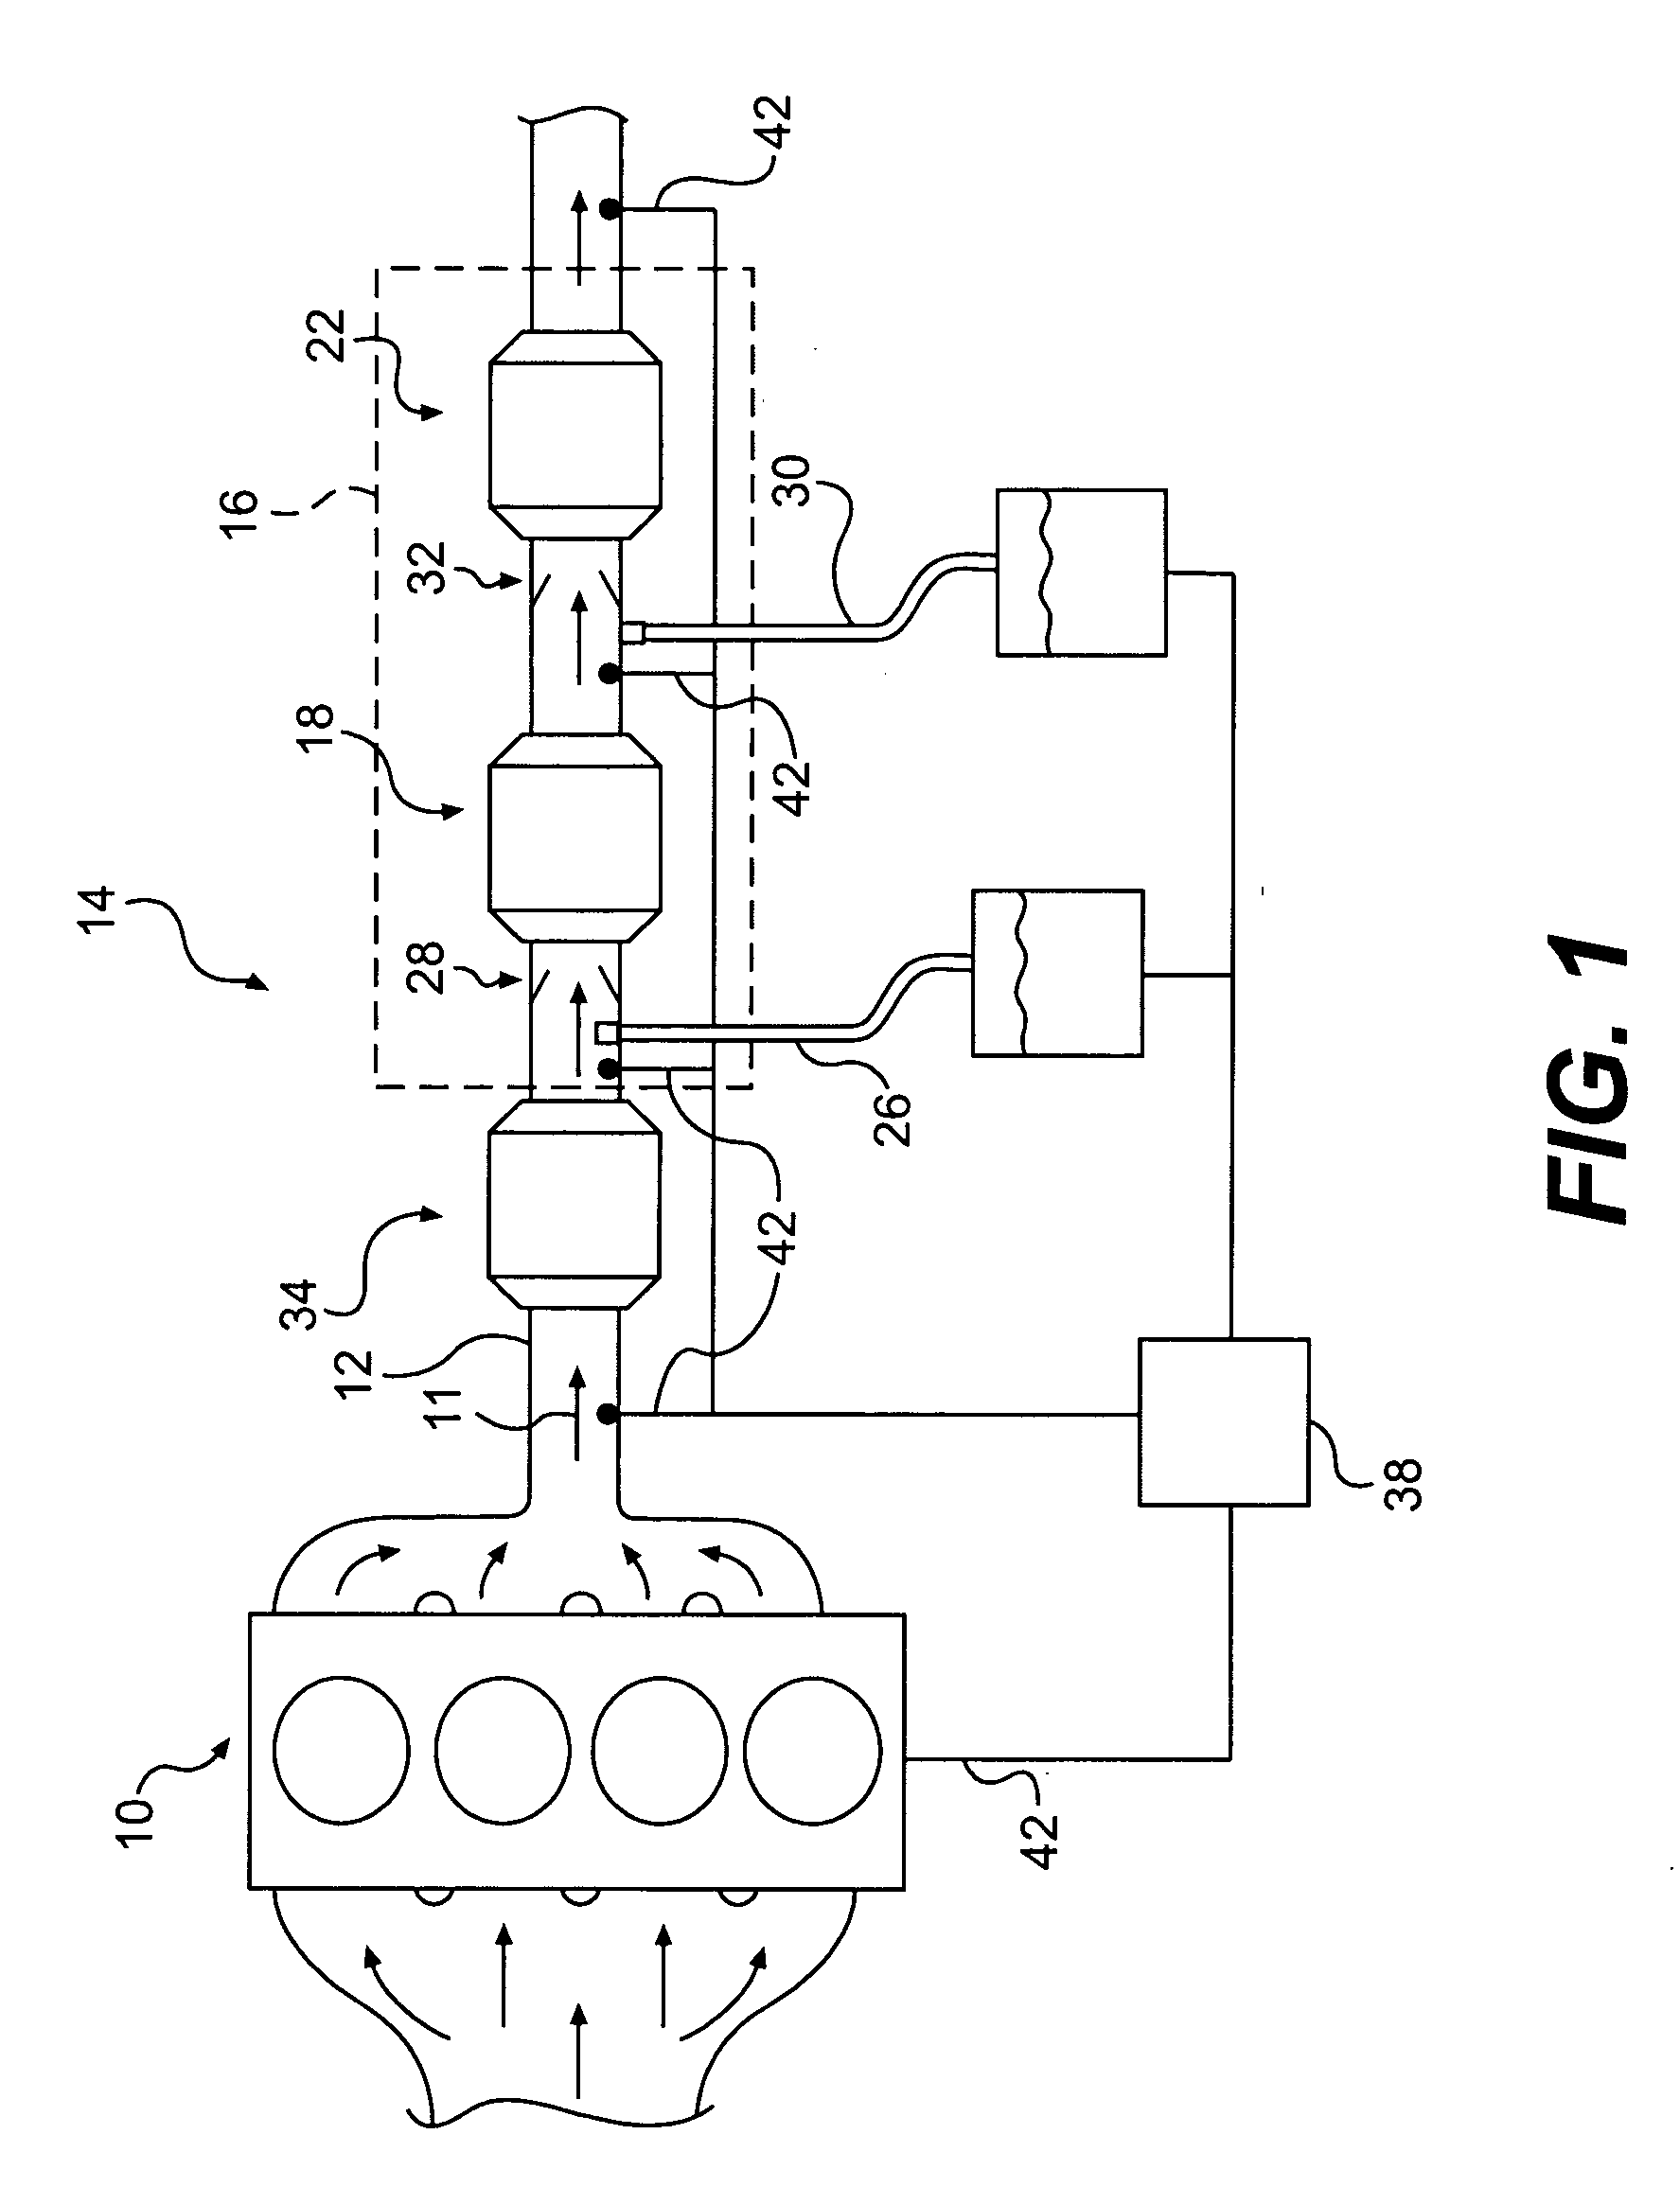 Multi-stage system for selective catalytic reduction